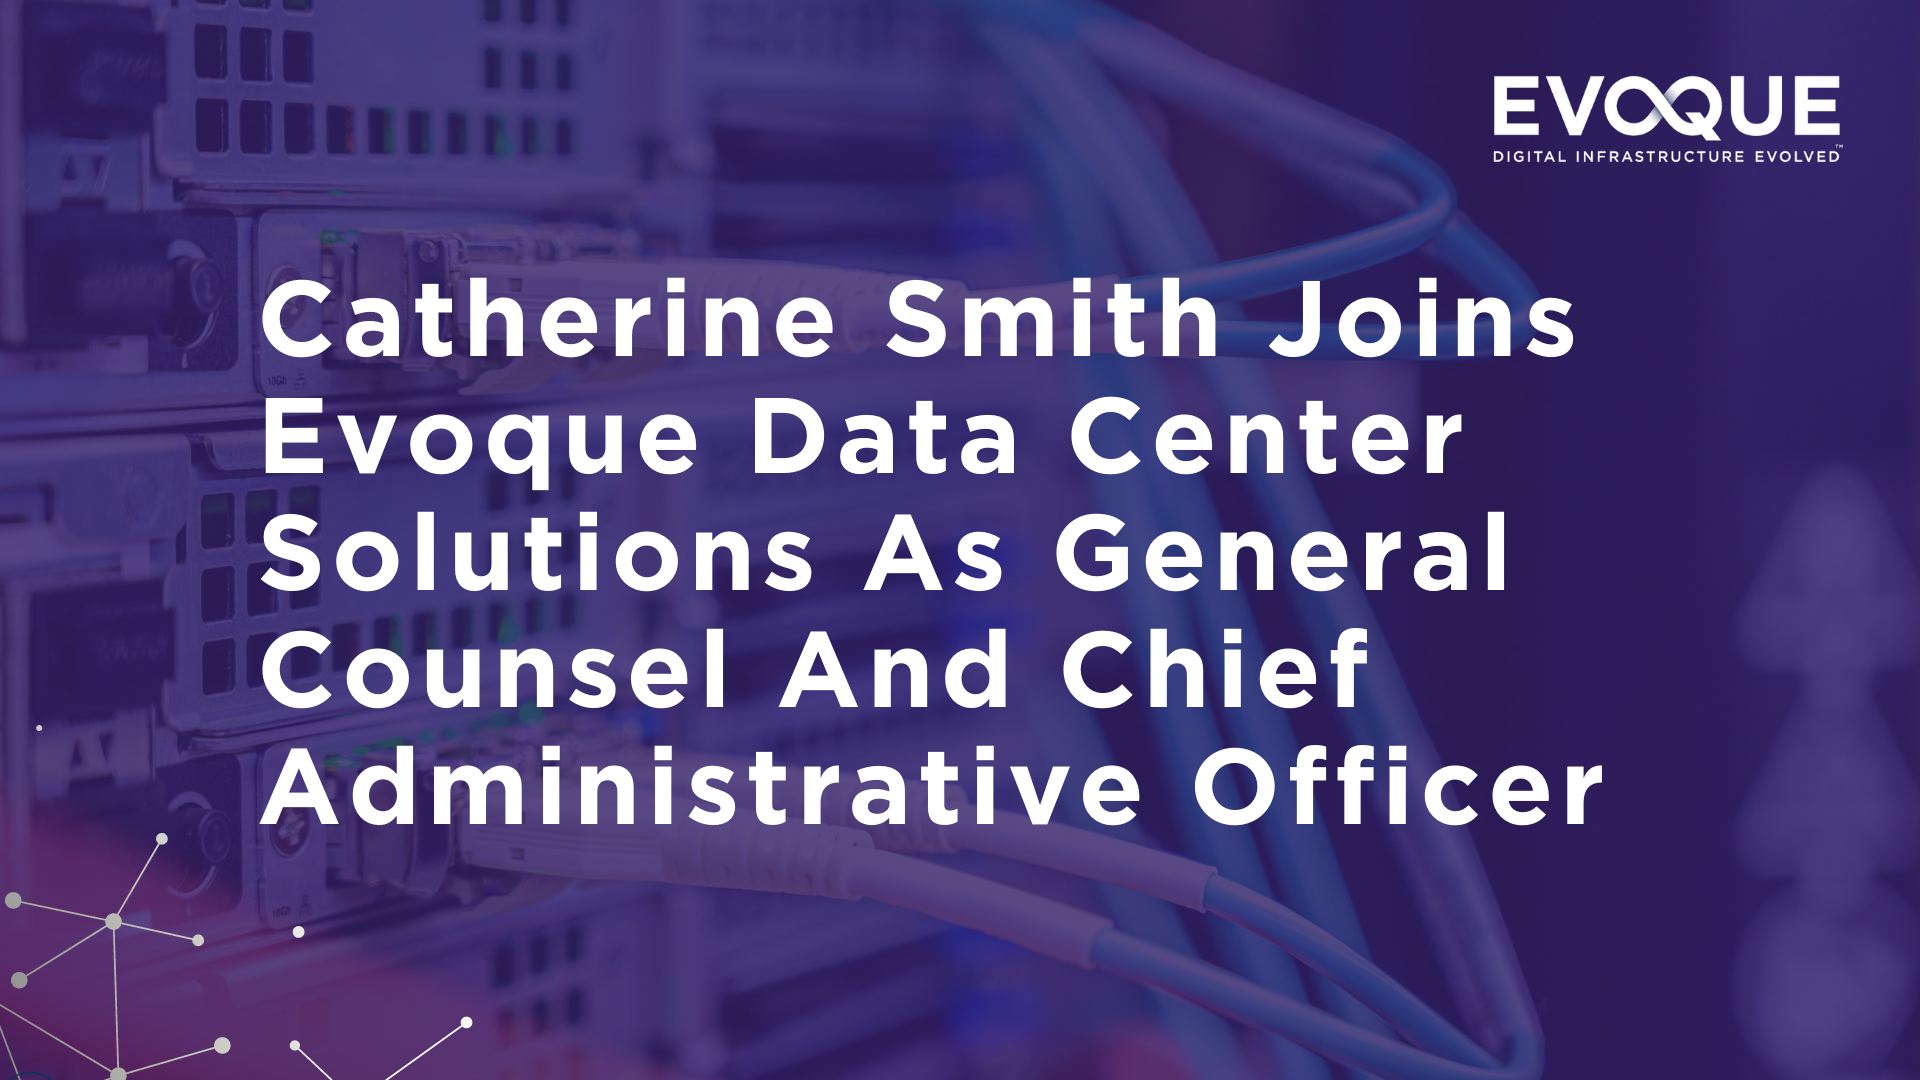 Catherine Smith Joins Evoque Data Center Solutions As General Counsel And Chief Administrative Officer